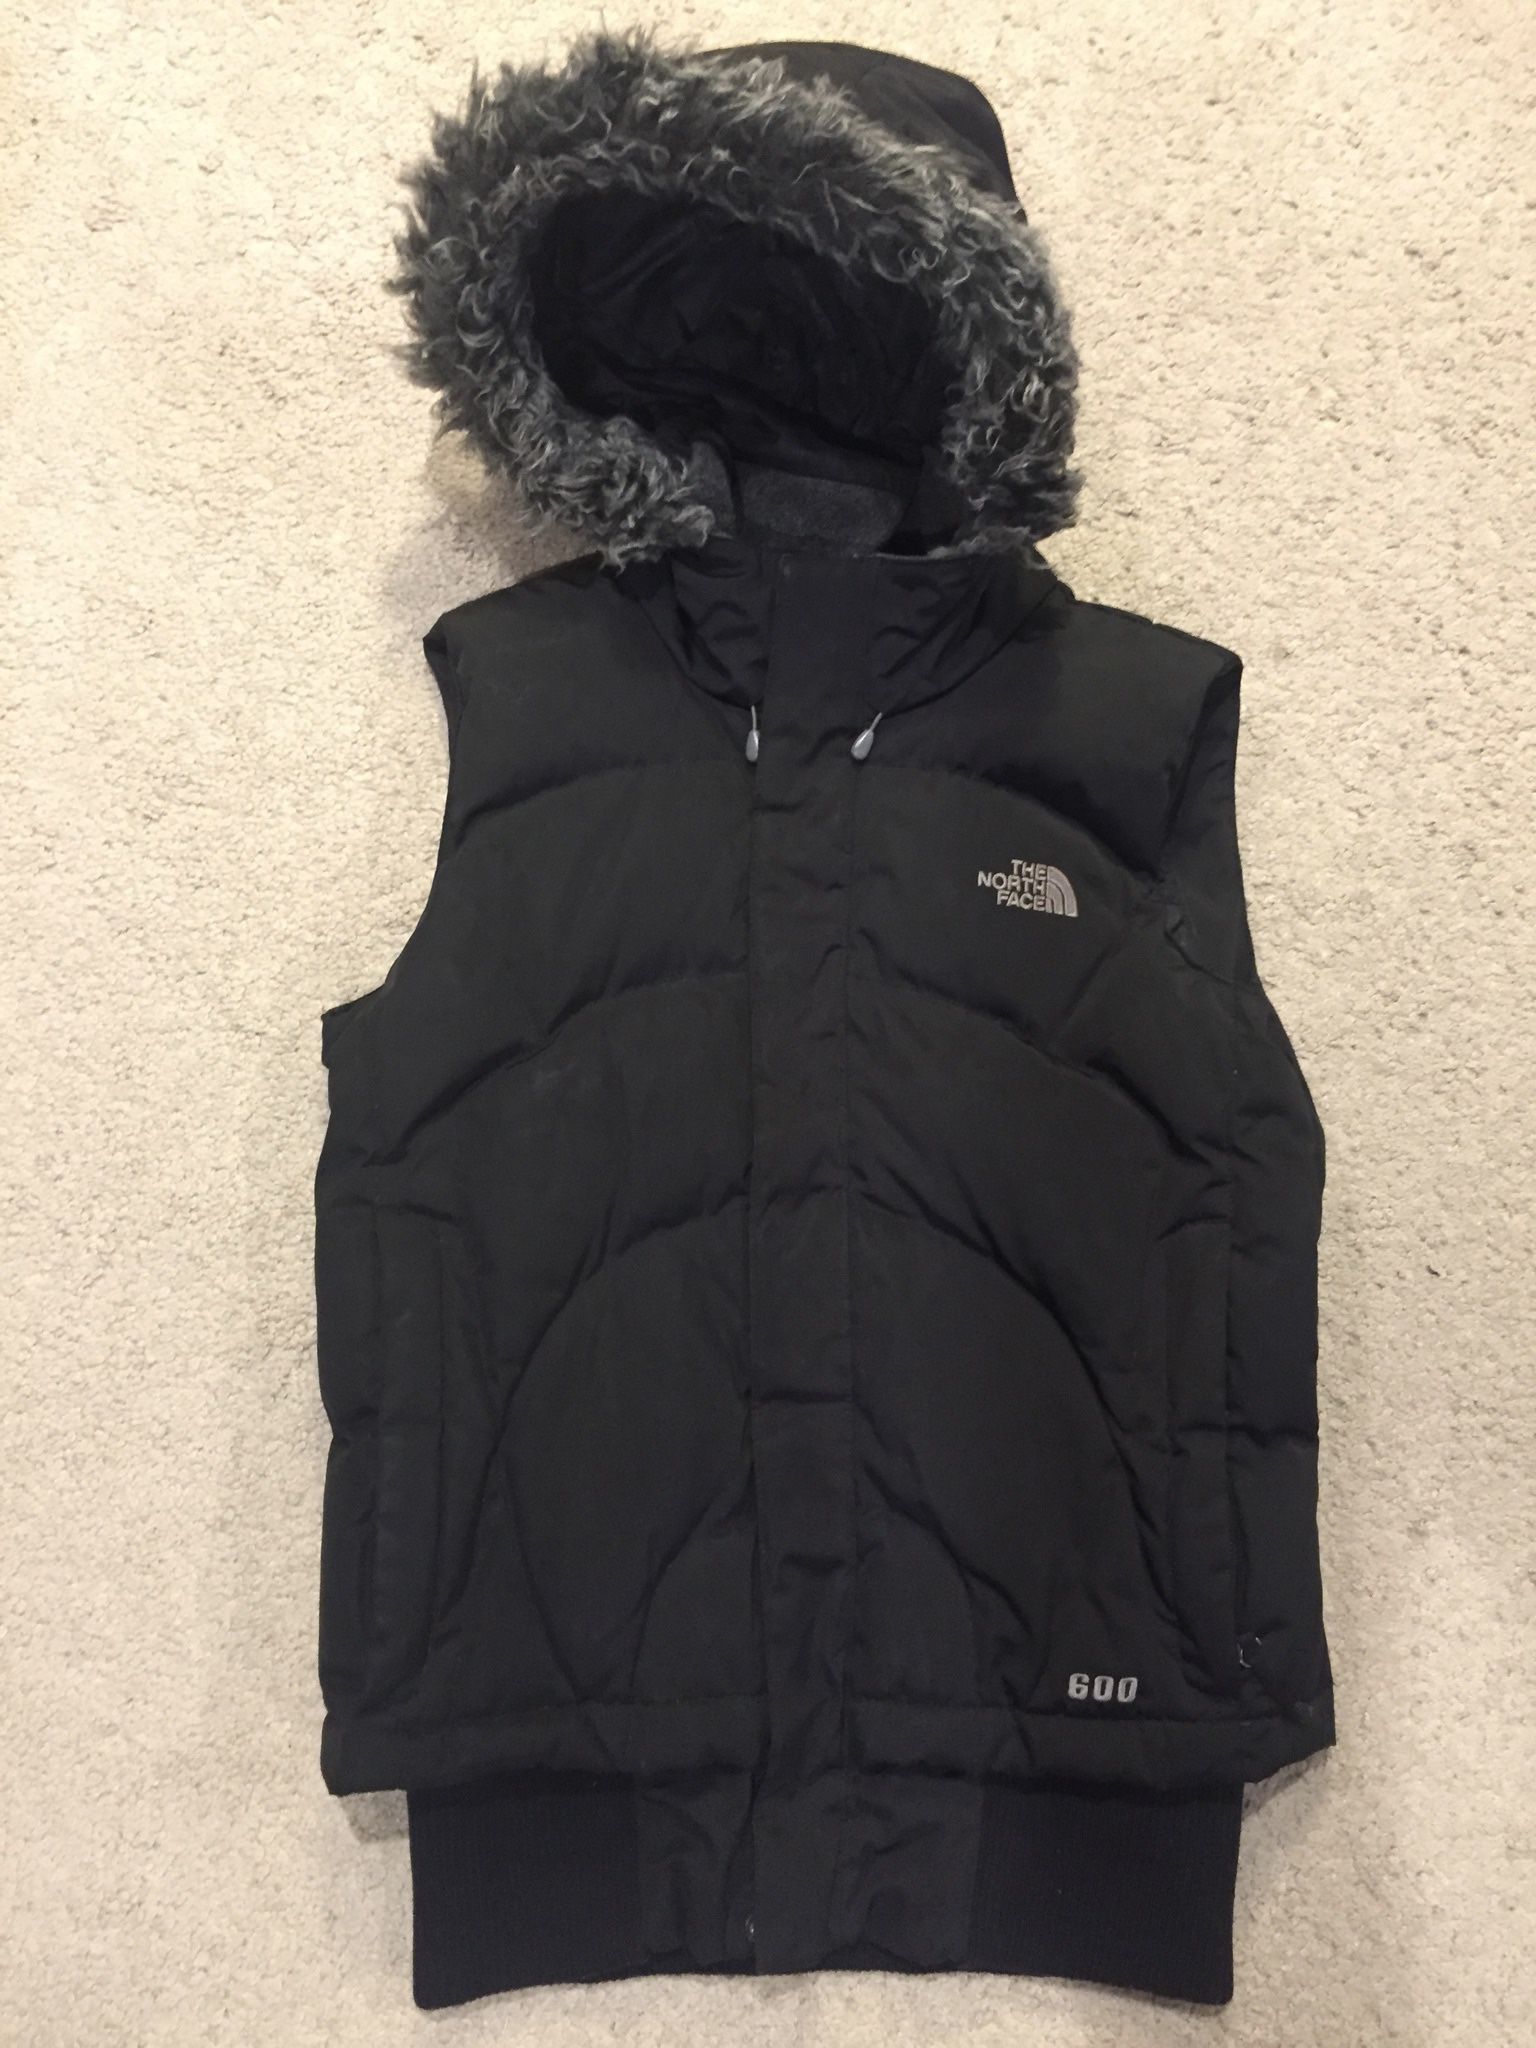 NORTH FACE / "PRODIGY" 600 Down Puffy Vest Coat Jacket w/ Fur Hood / SIZE: Women's Small / Excellent Condition!! / Black & Gold